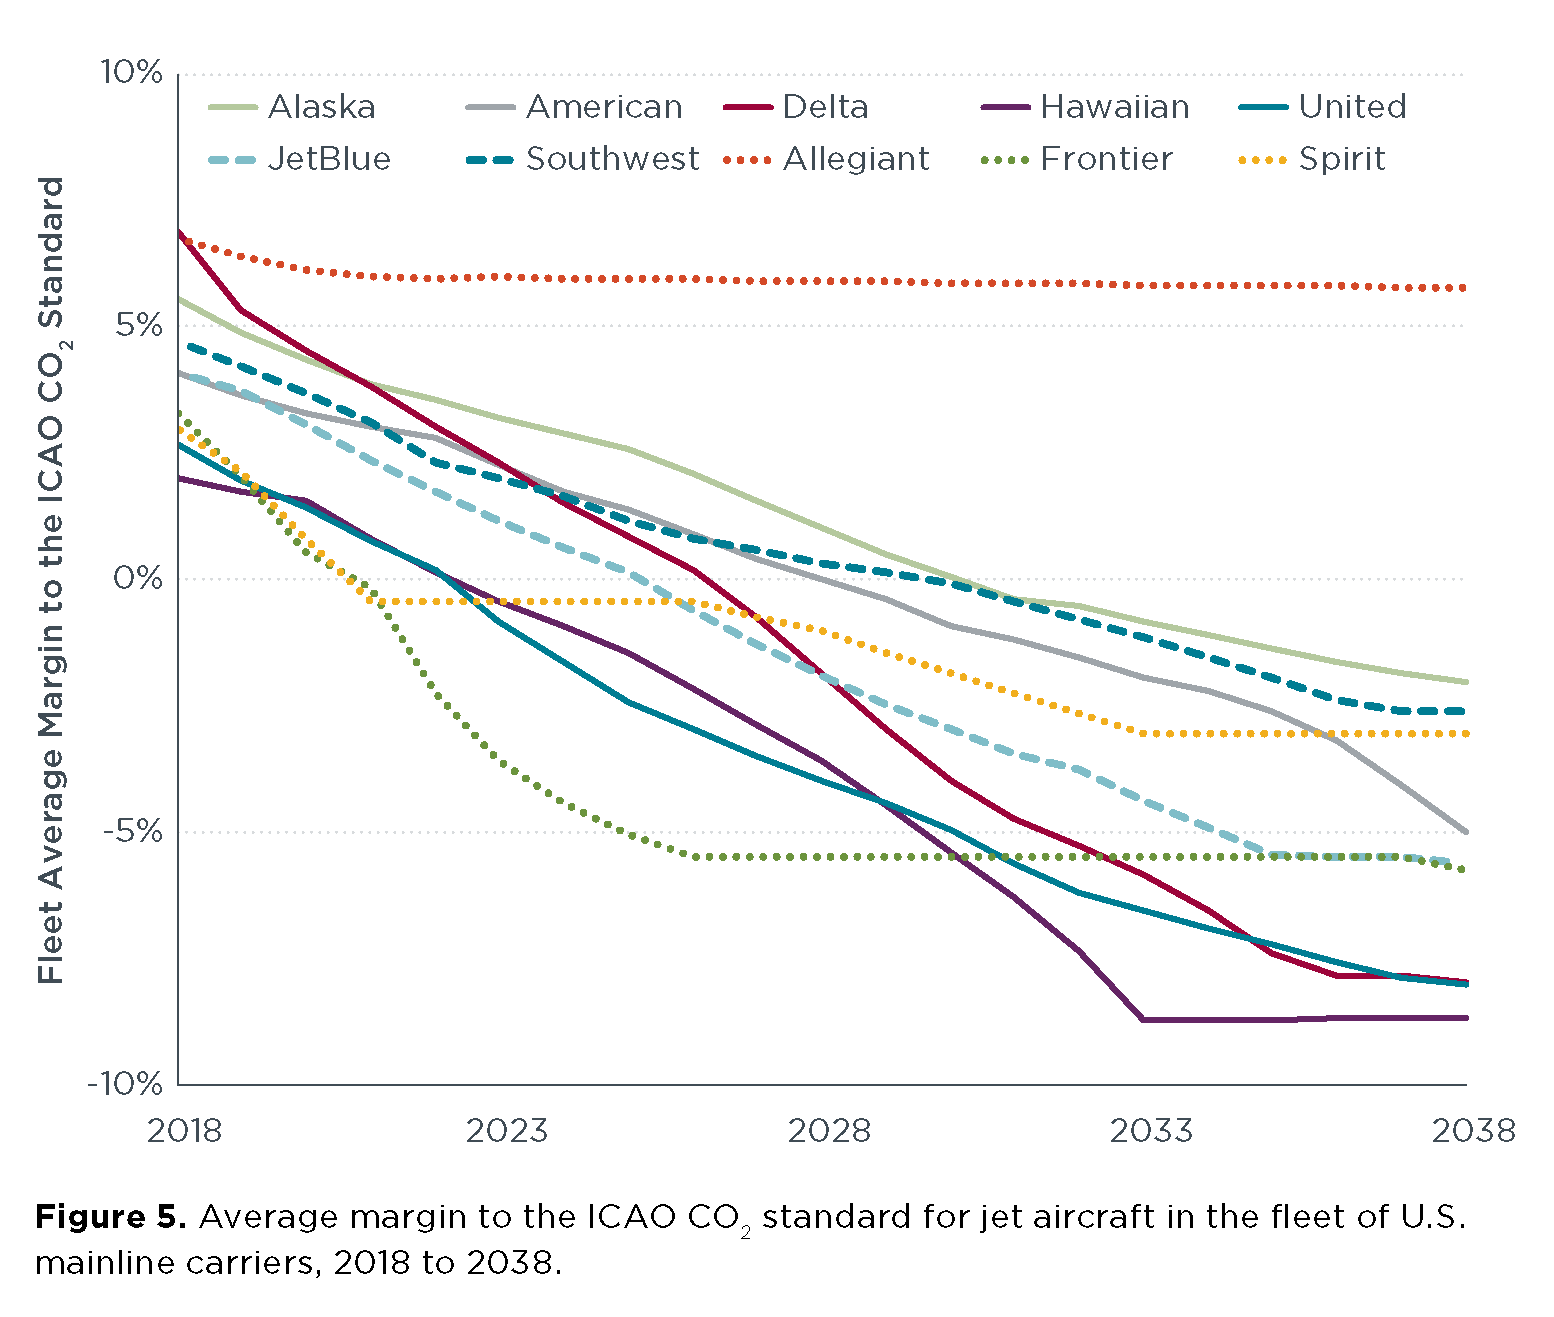 average margin to ICAO CO2 standard over time per airline